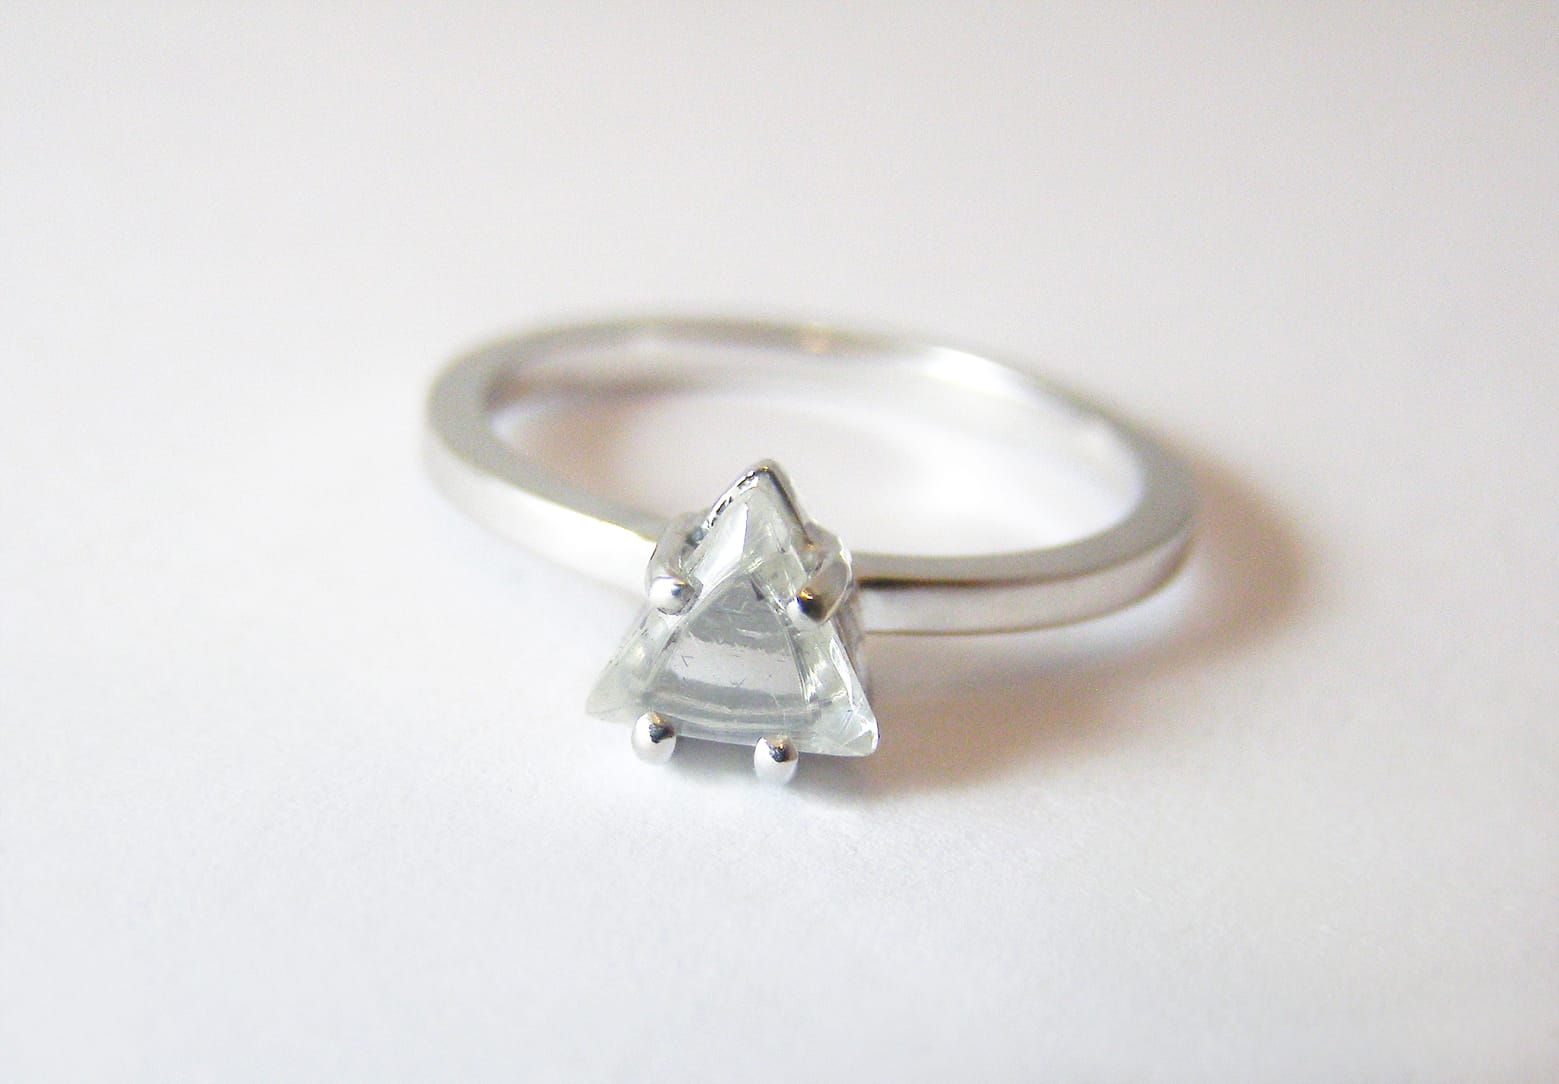 Rough macle diamond in 18ct Fairtrade white gold by Zoe Pook Jewellery